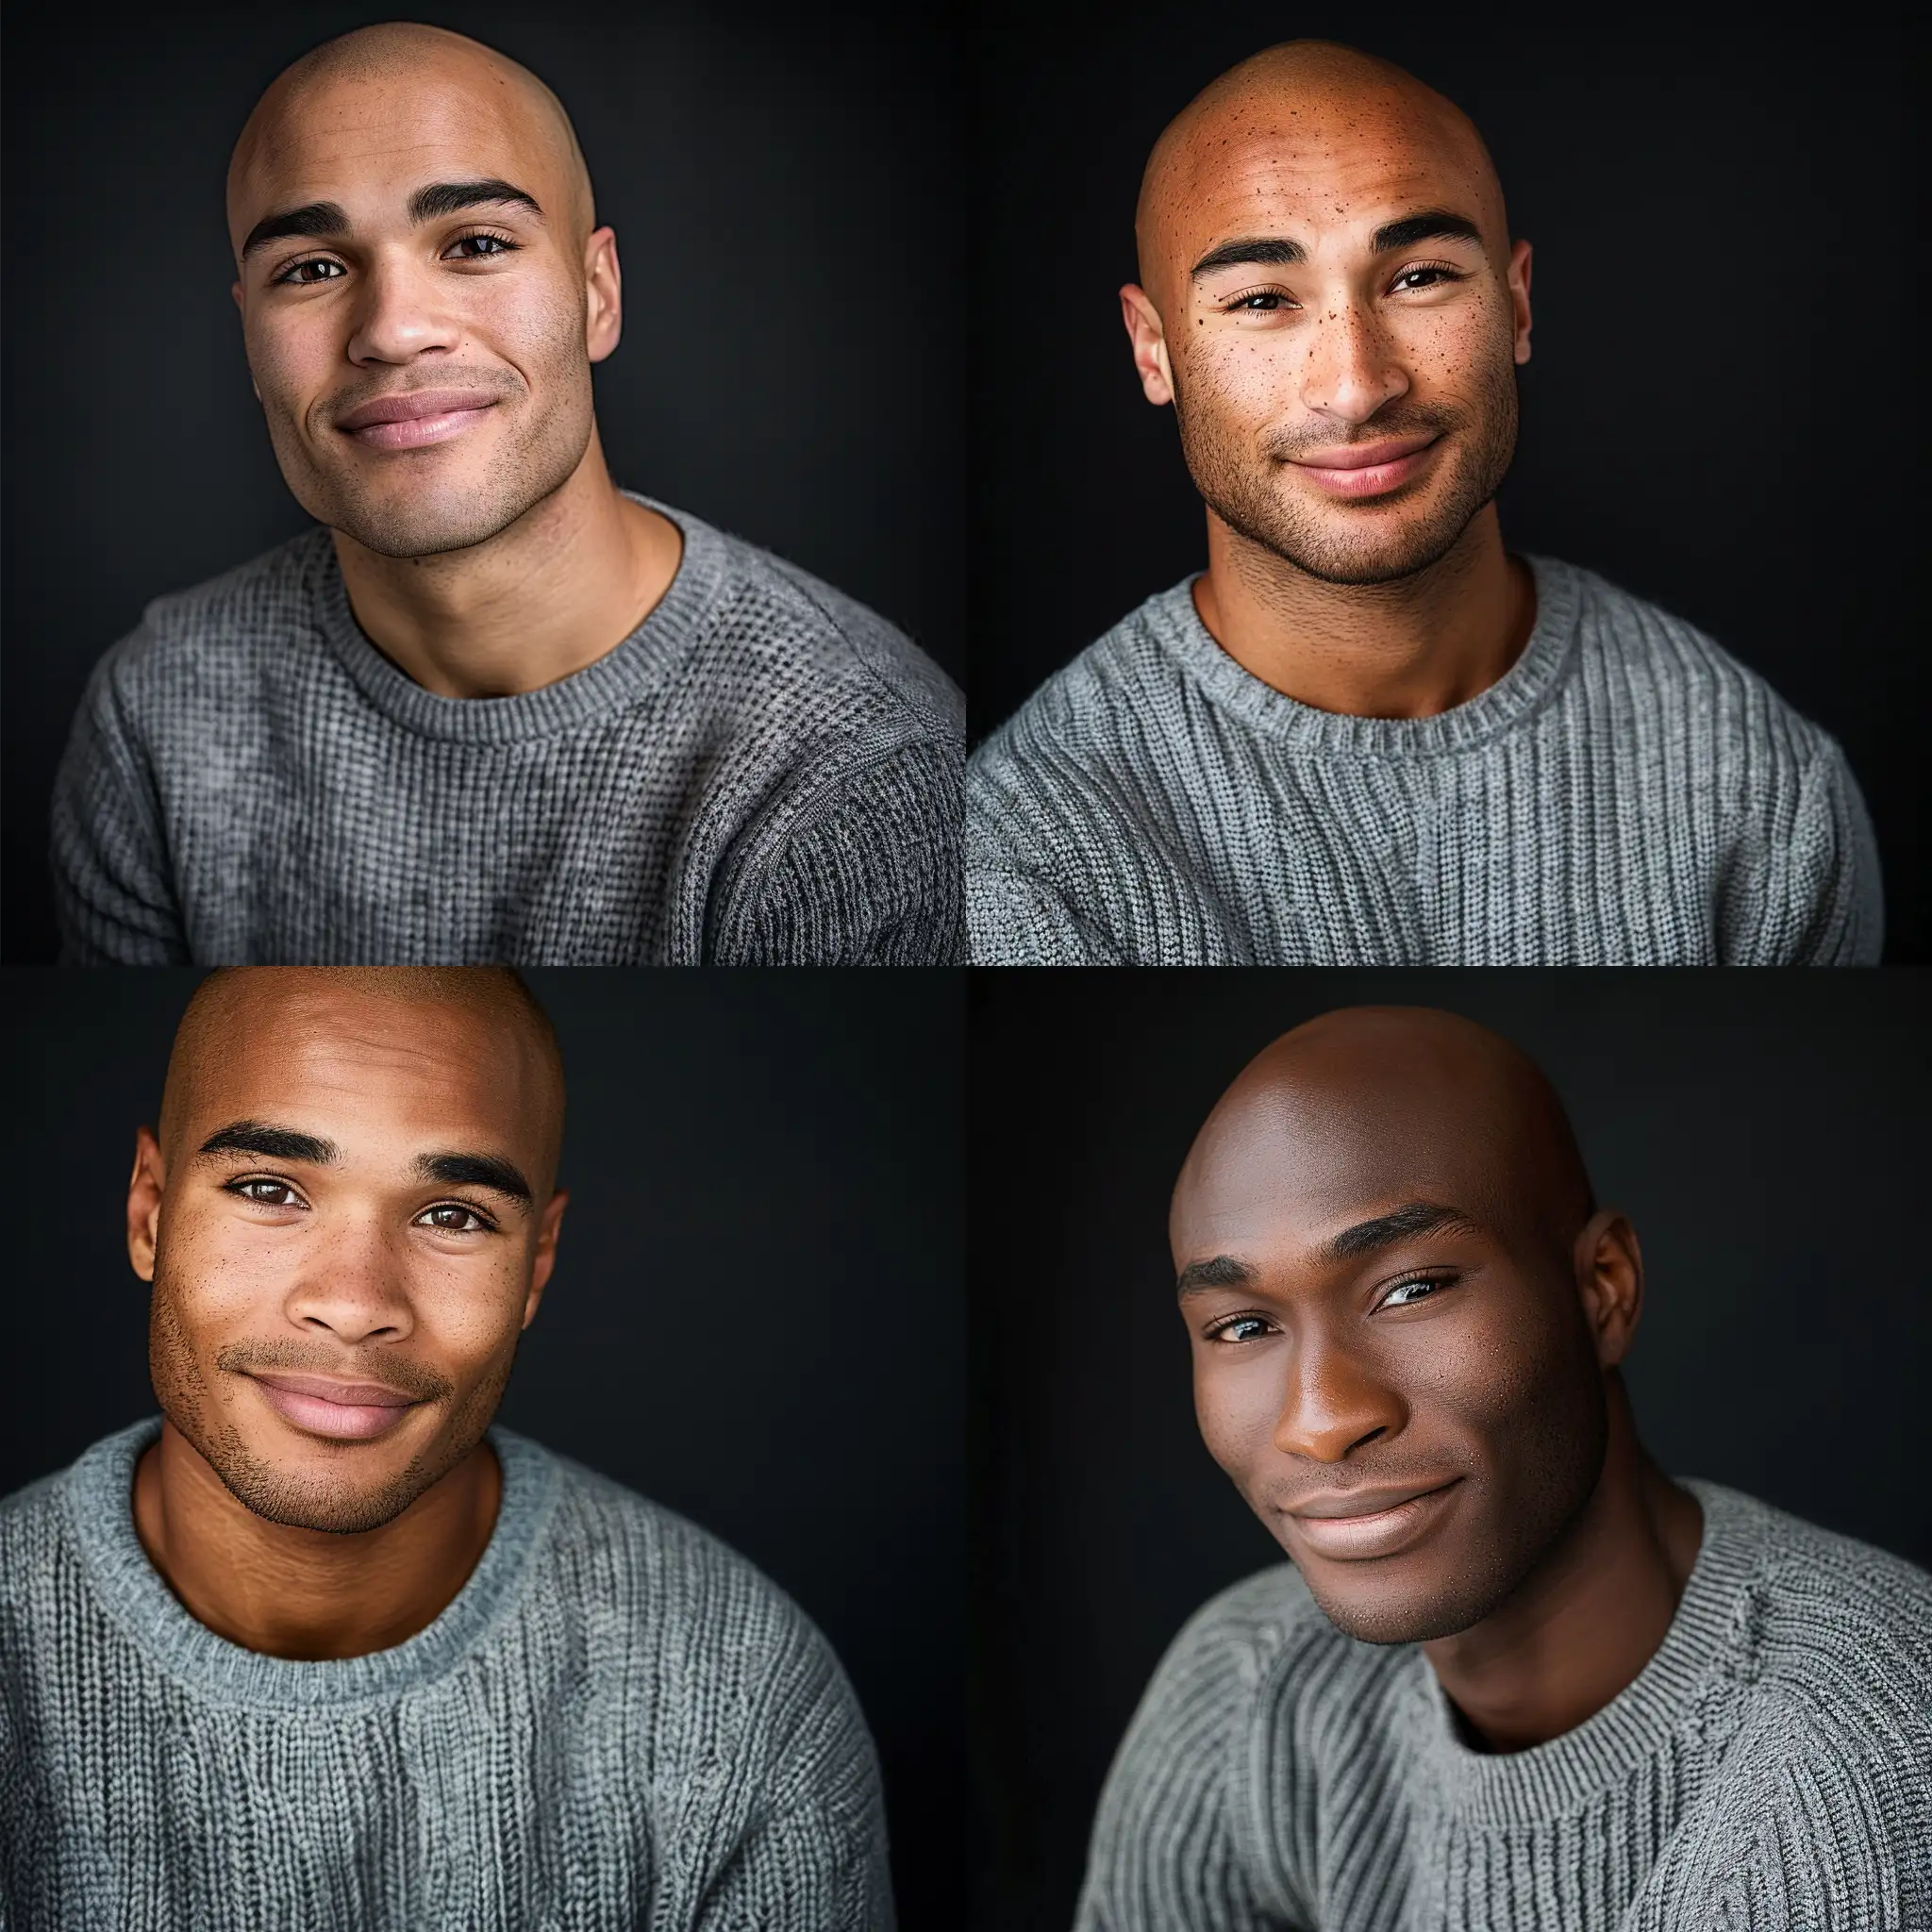 Portrait, a man in his 20s, no facial hair, bronze-skin, square face, wearing a grey sweater, bald fade hair, looking into the camera, smiling, captured by Canon camera, in a photography studio, simple black background,